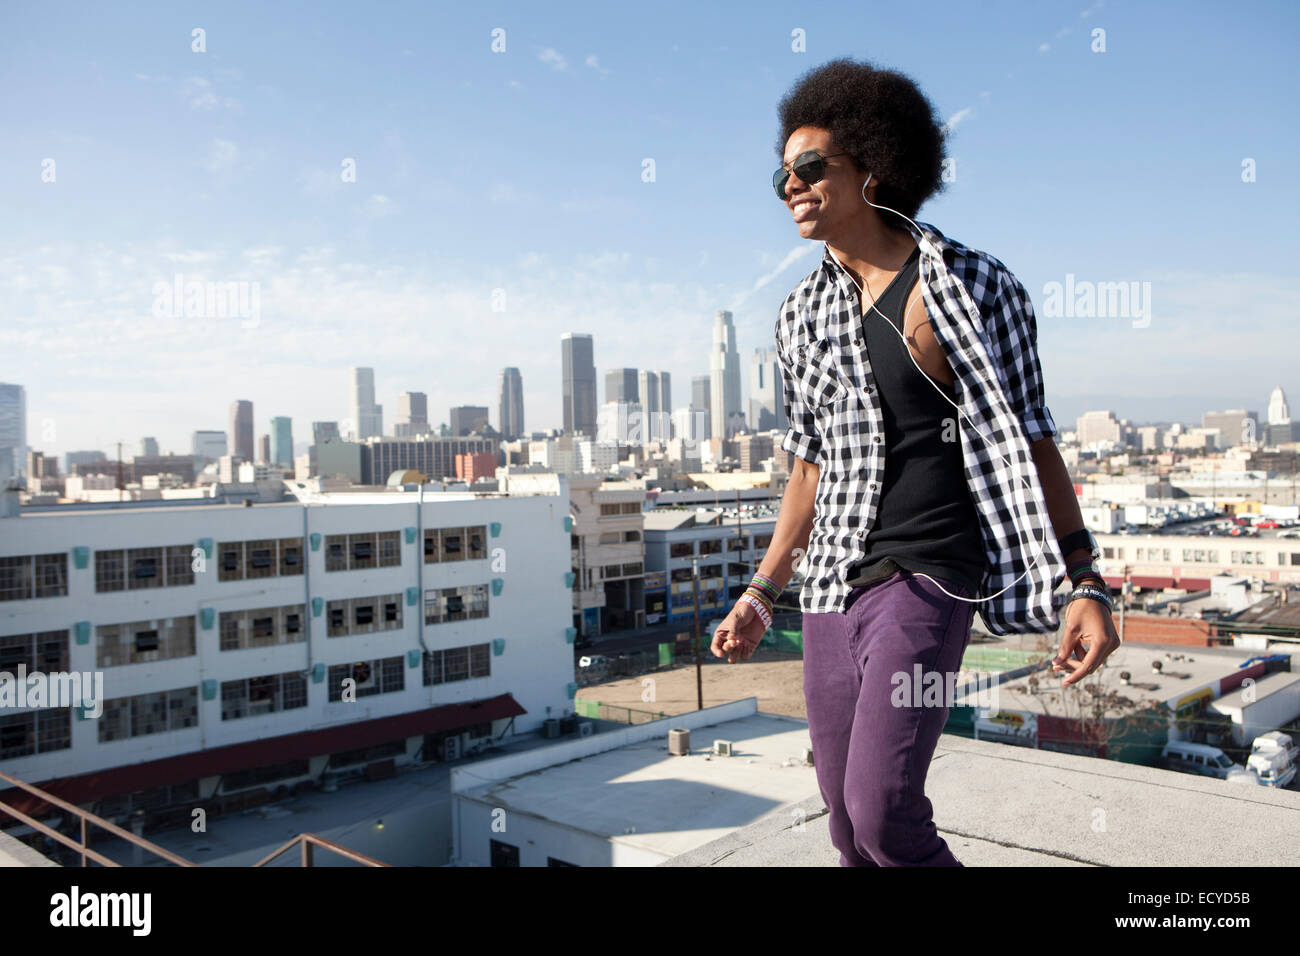 African American man standing on urban rooftop Stock Photo